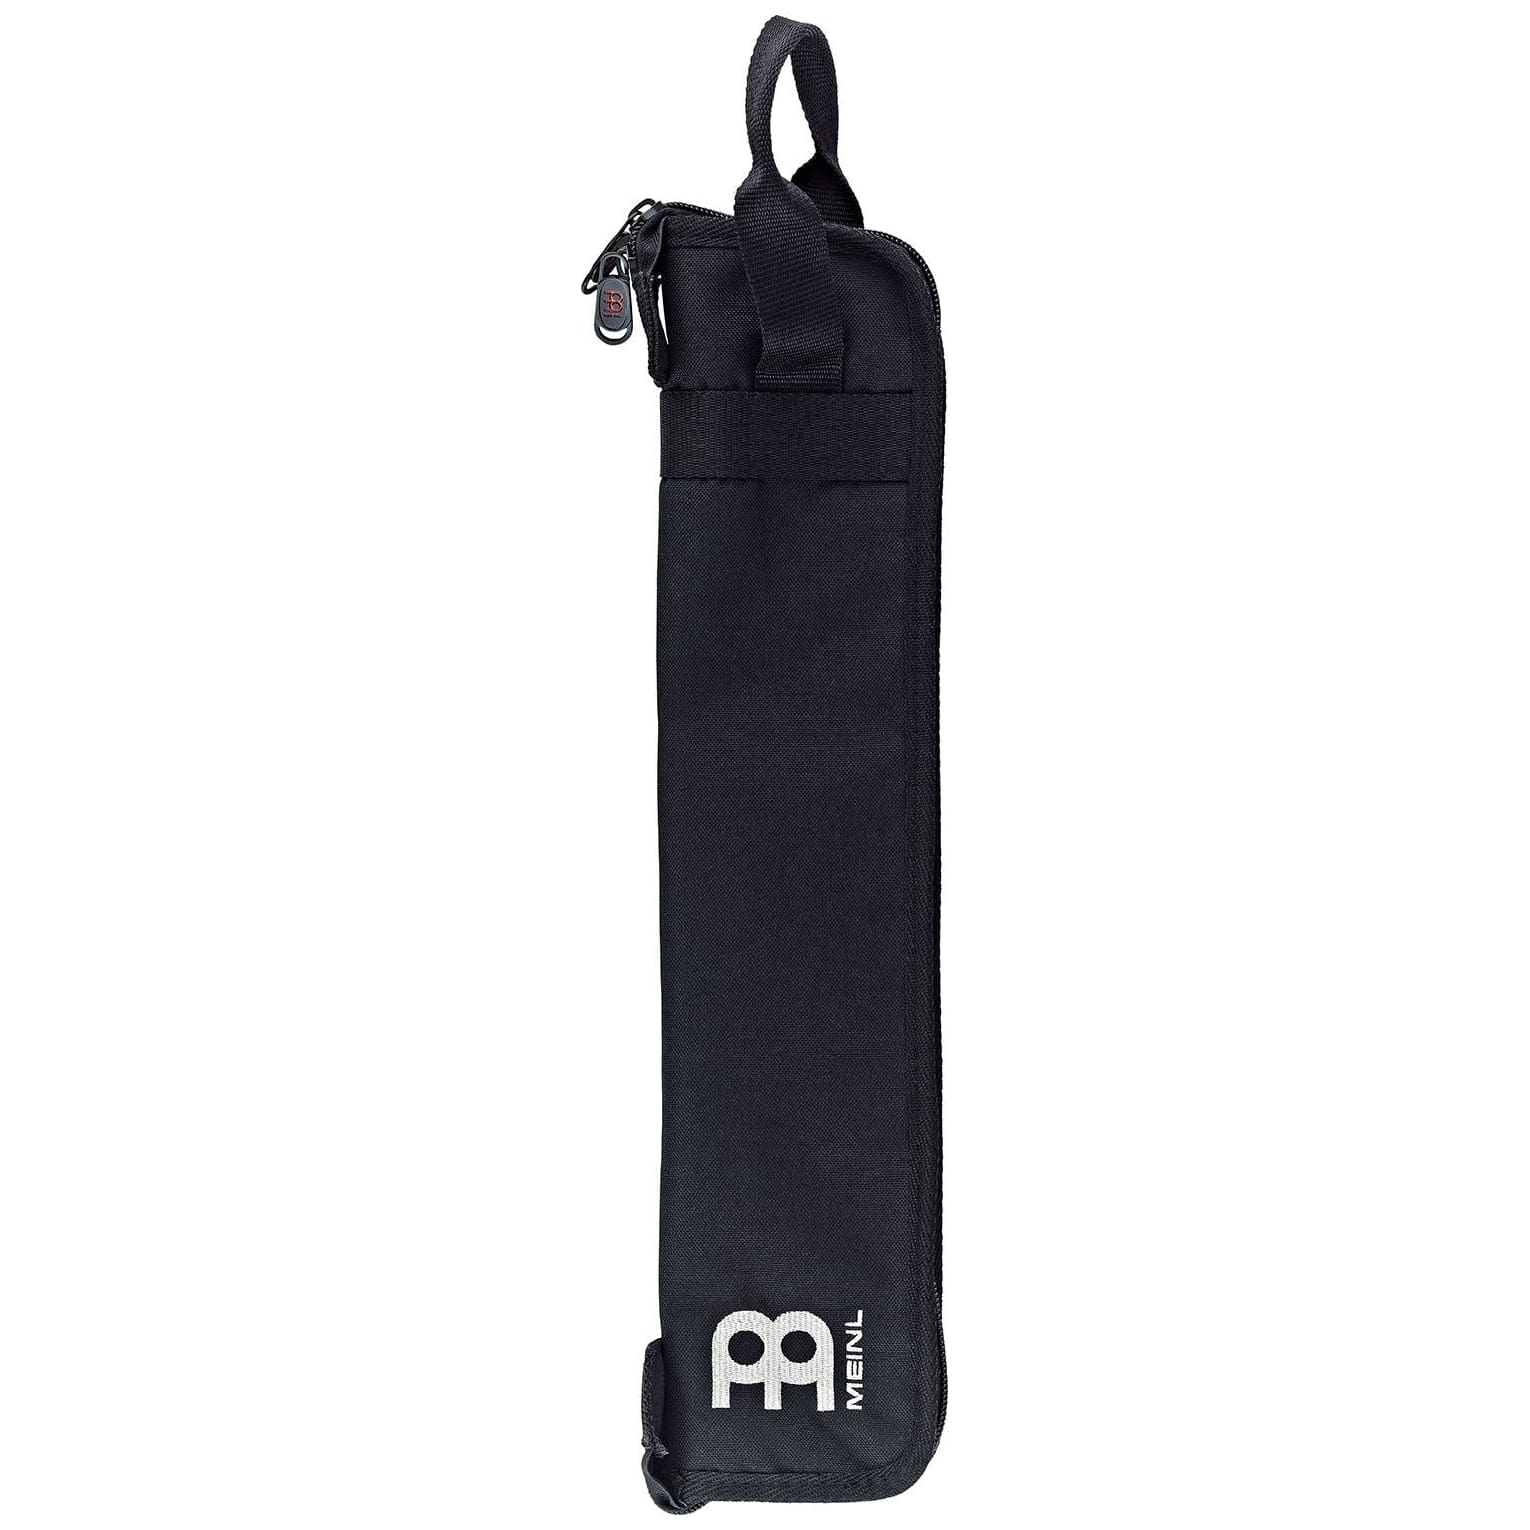 Meinl Cymbals MCSB - Compact Stick Bag 